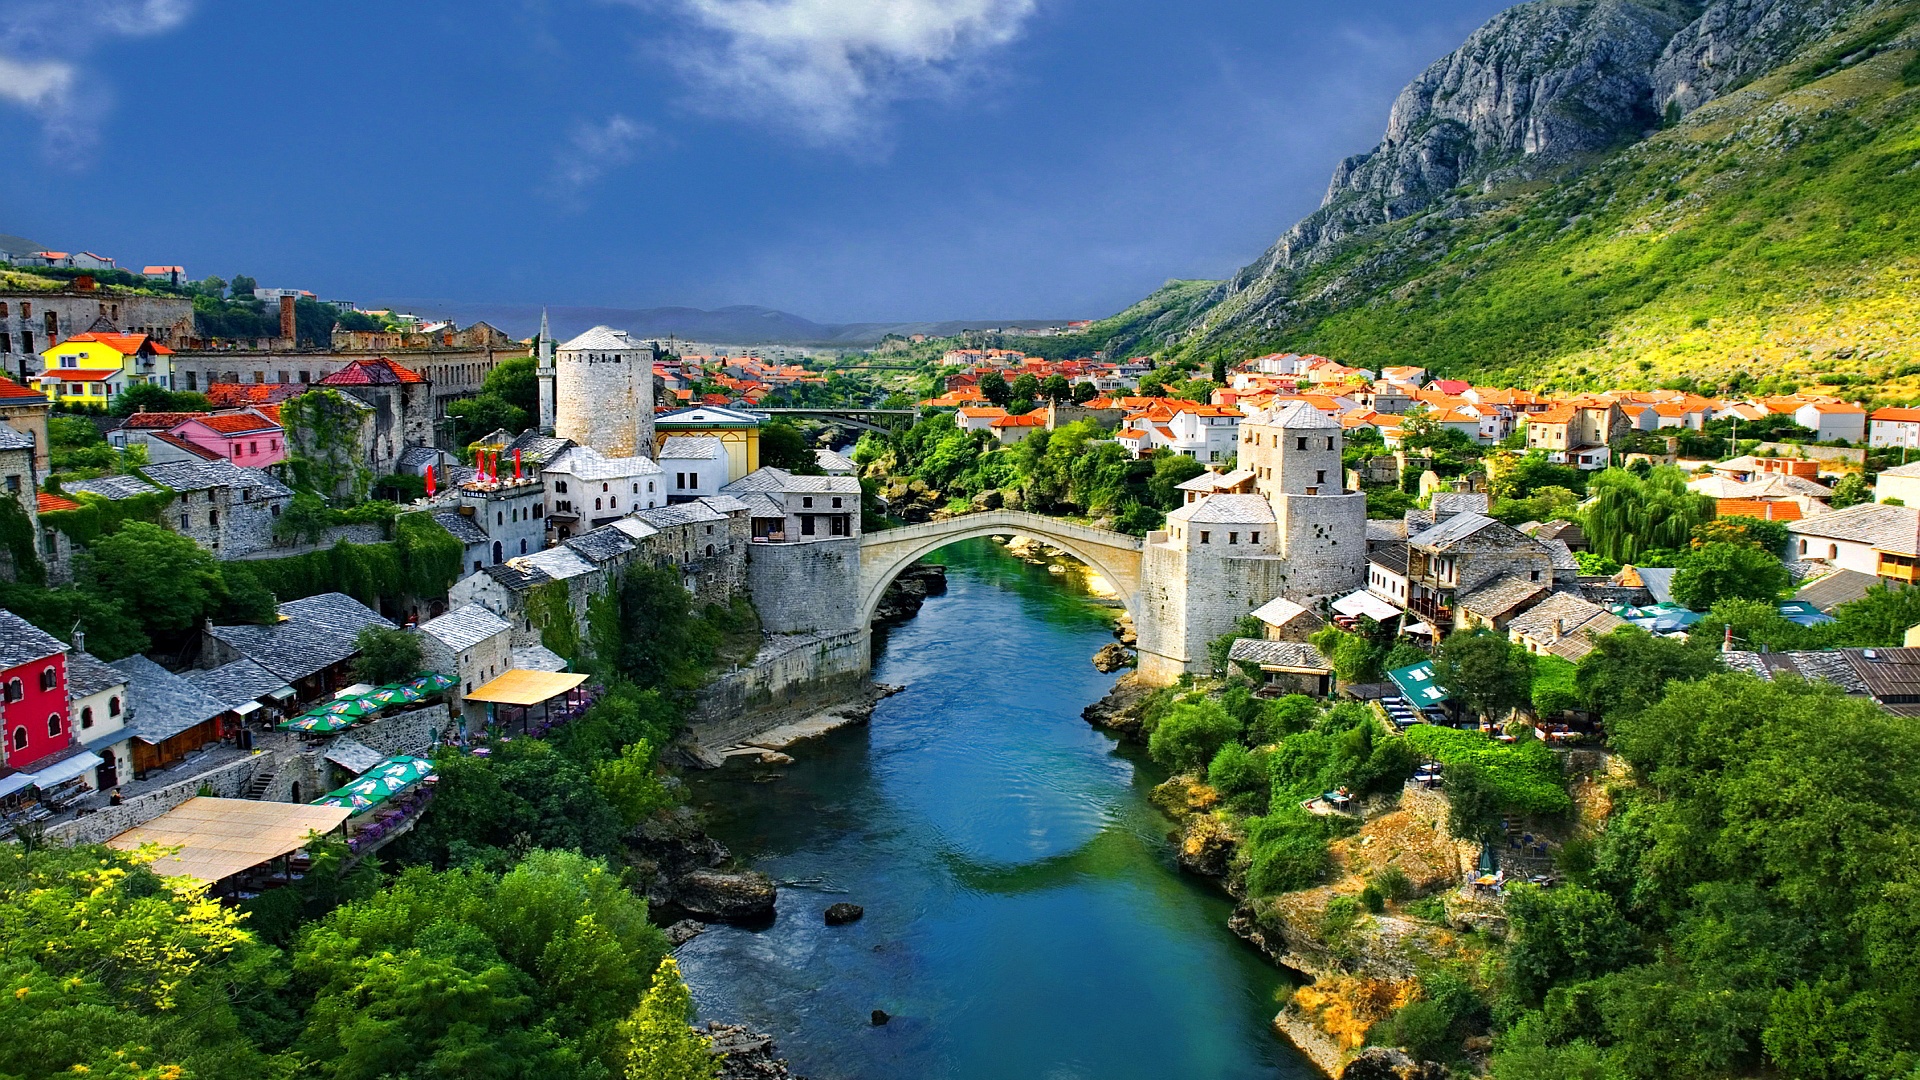 Nice Images Collection: Mostar Desktop Wallpapers